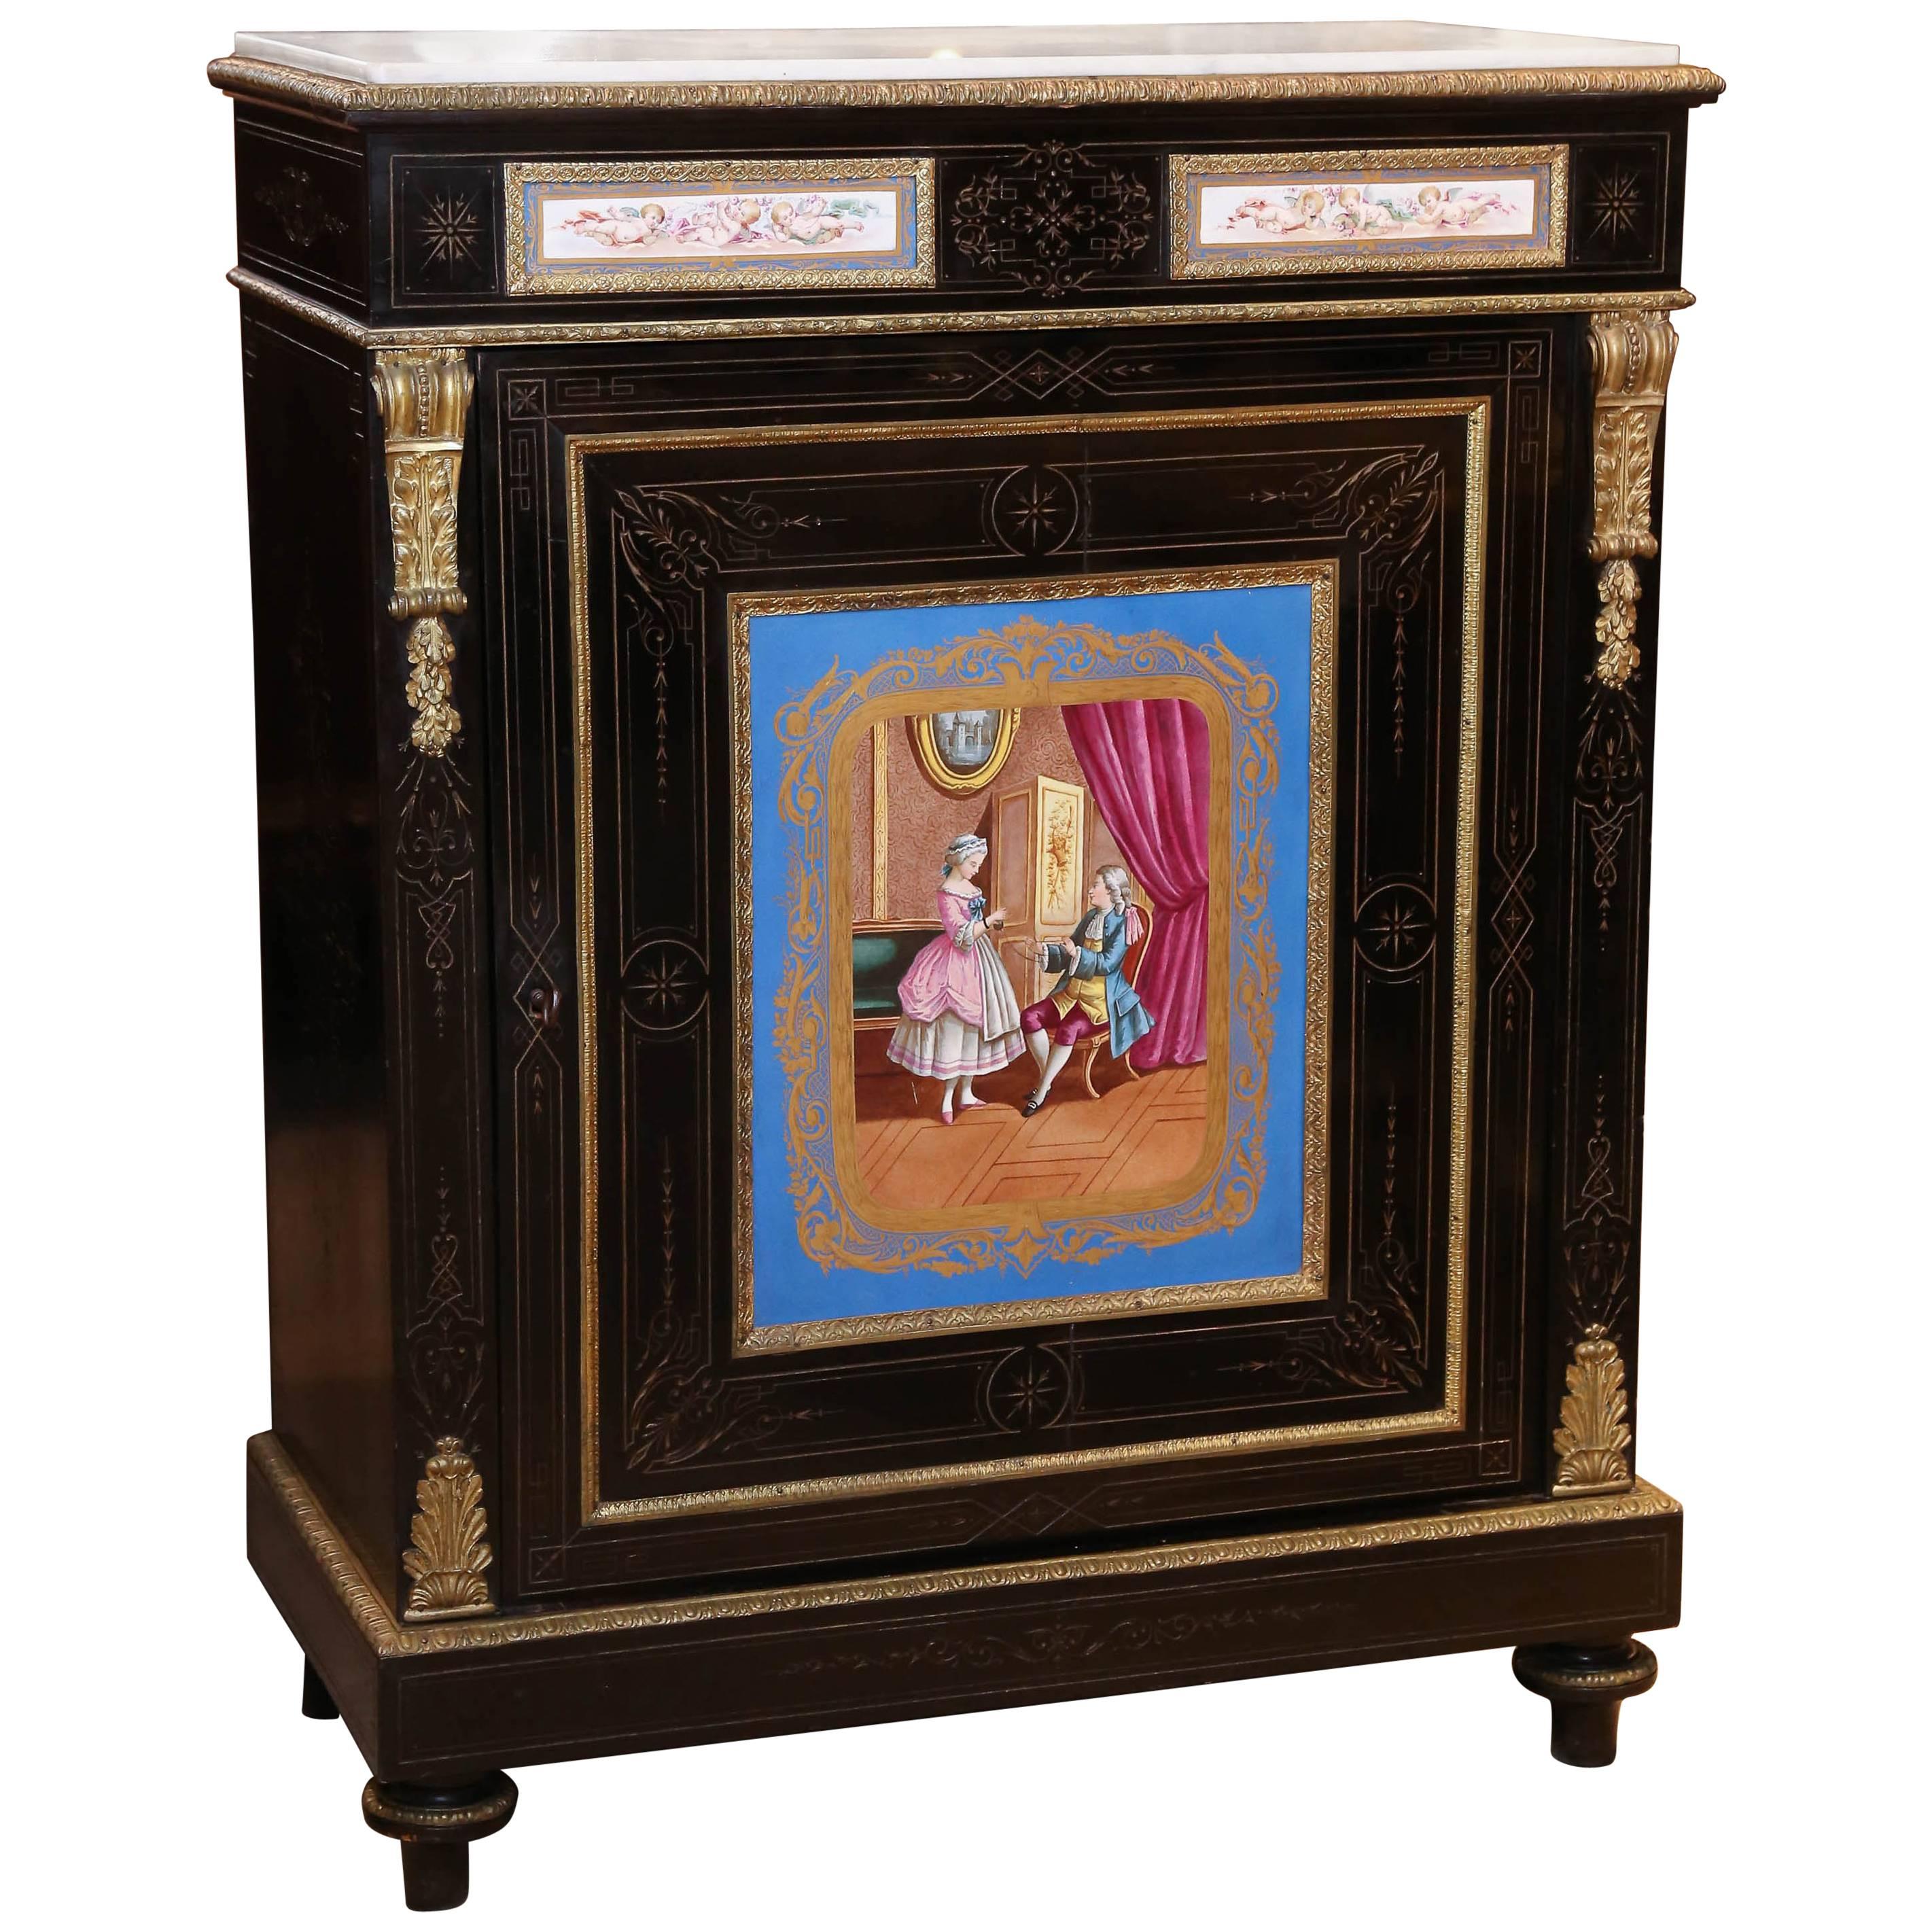 19th Century, French Ebonized Cabinet with Sèvres style Porcelain Painting 